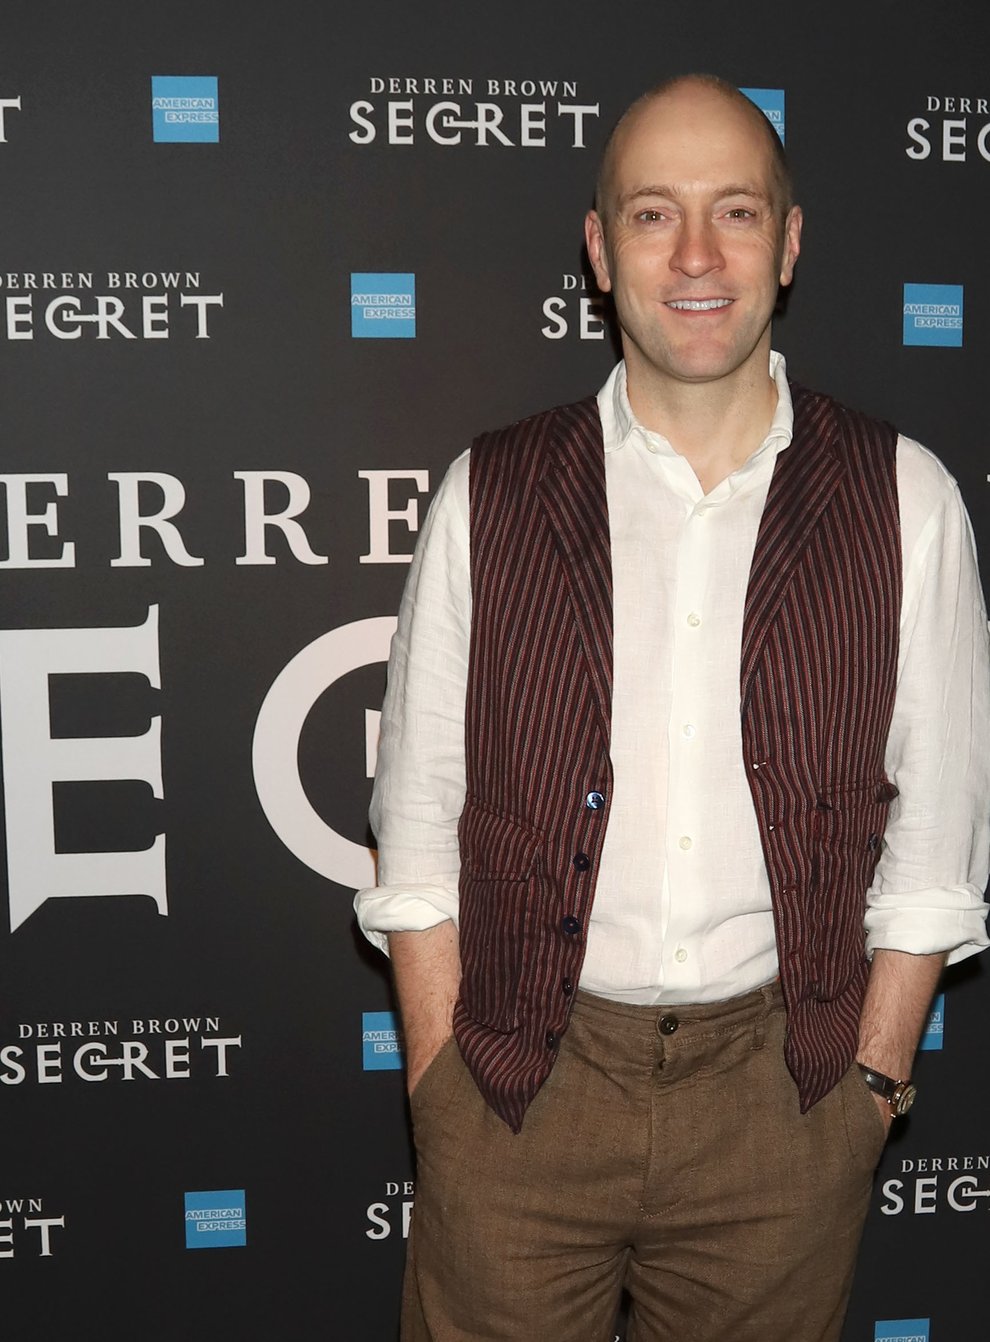 Derren Brown is bringing a new live show to fans this summer